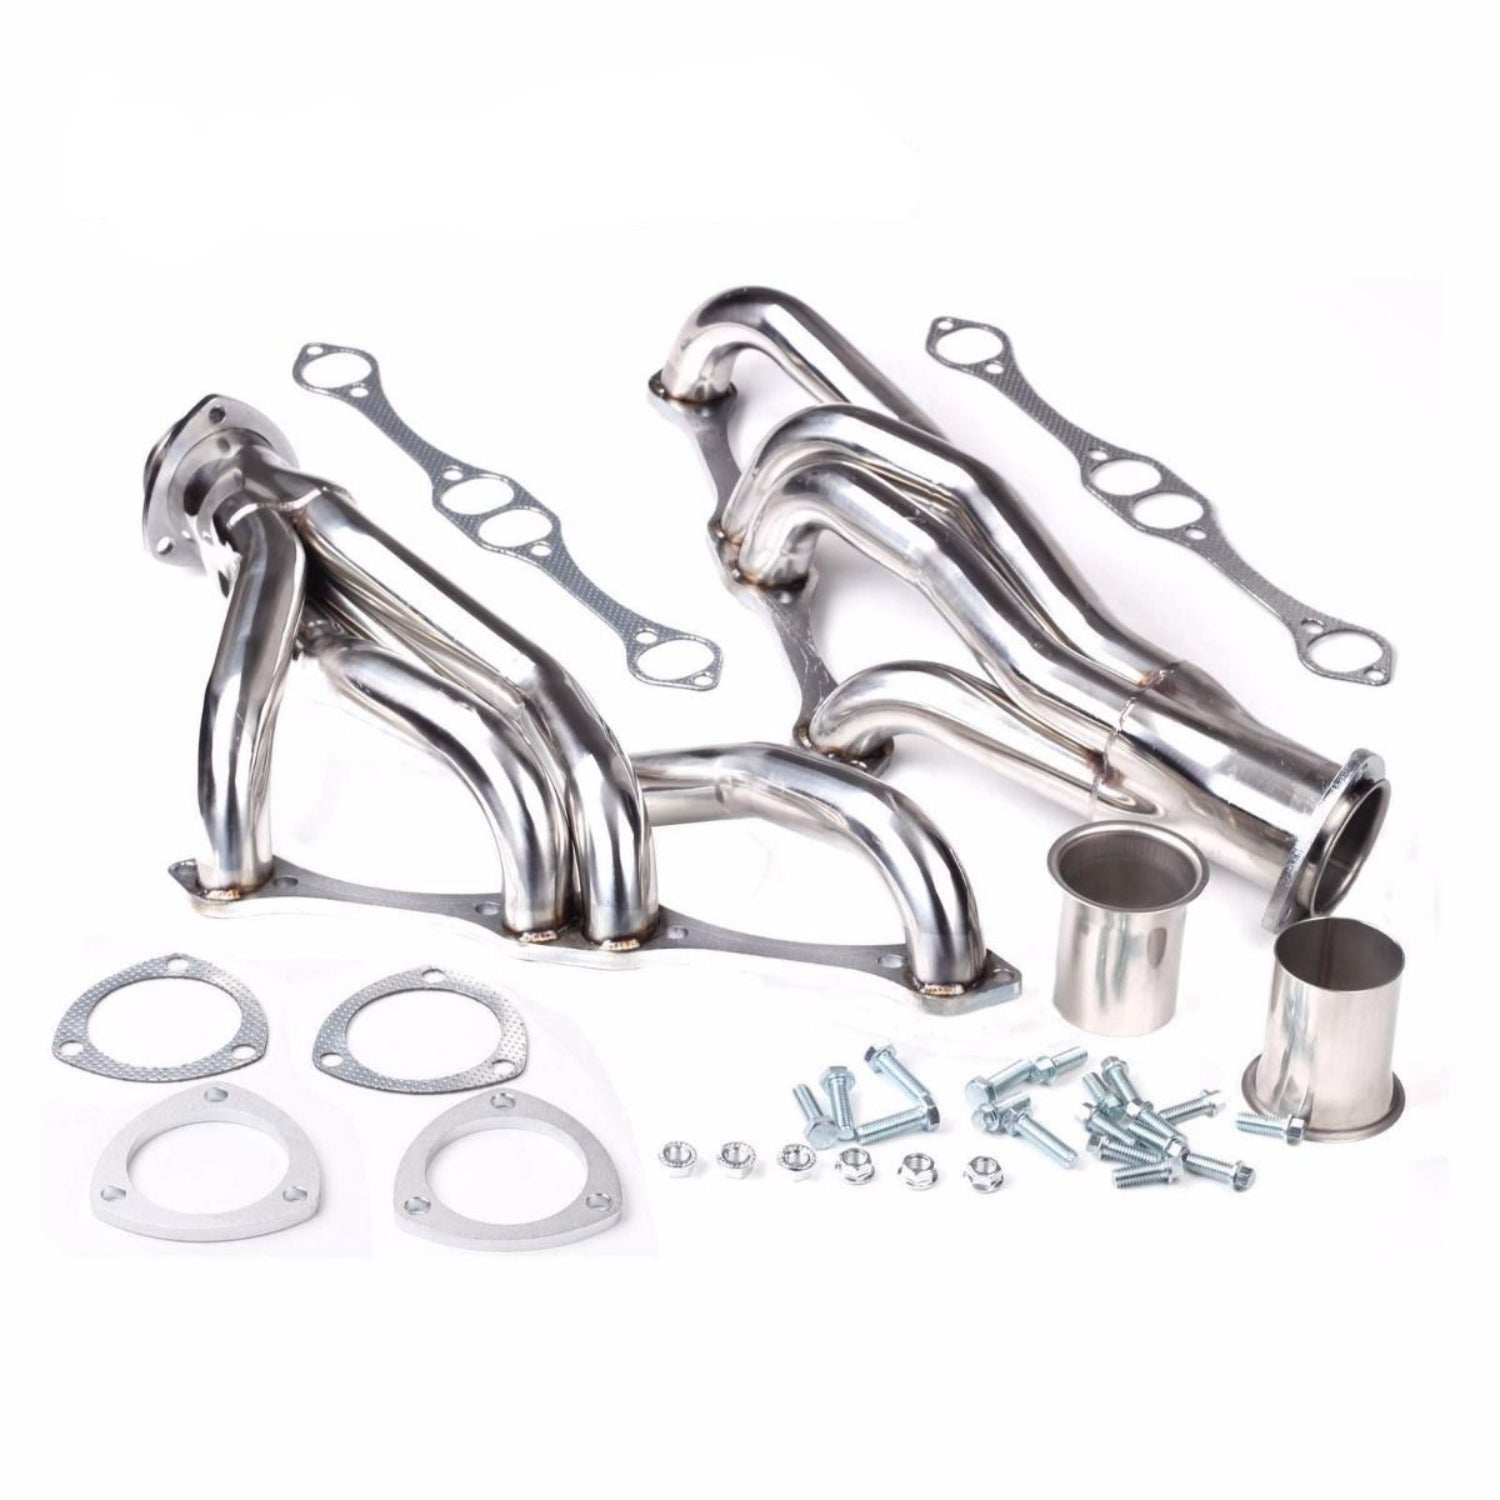 Exhaust Manifold Header for Chevy Small Block SB V8 262 265 283 305 327 350 400